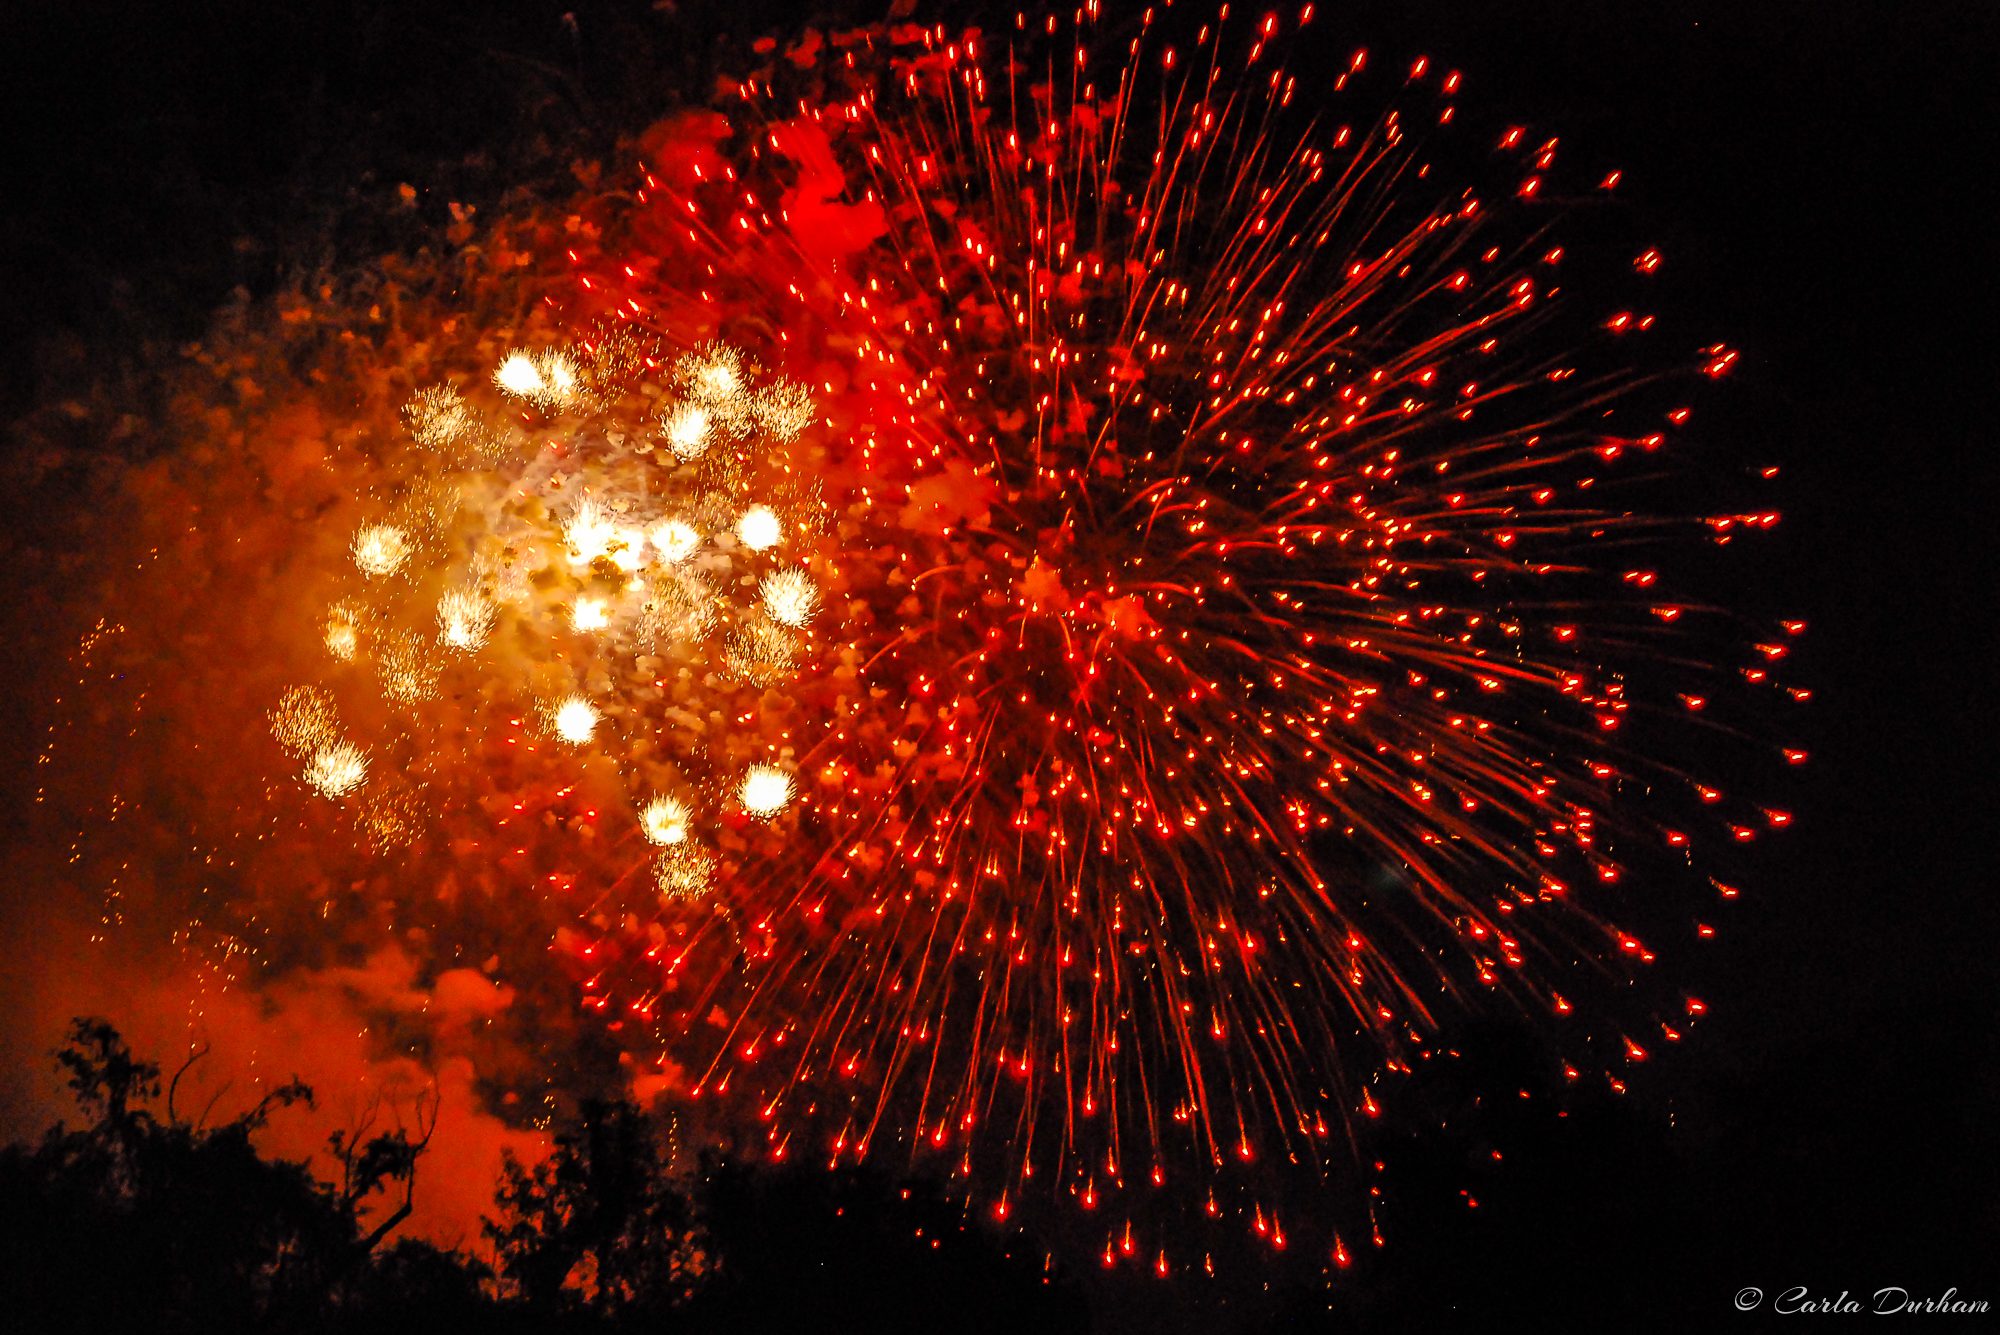 Fireworks in Washington on 4th of July